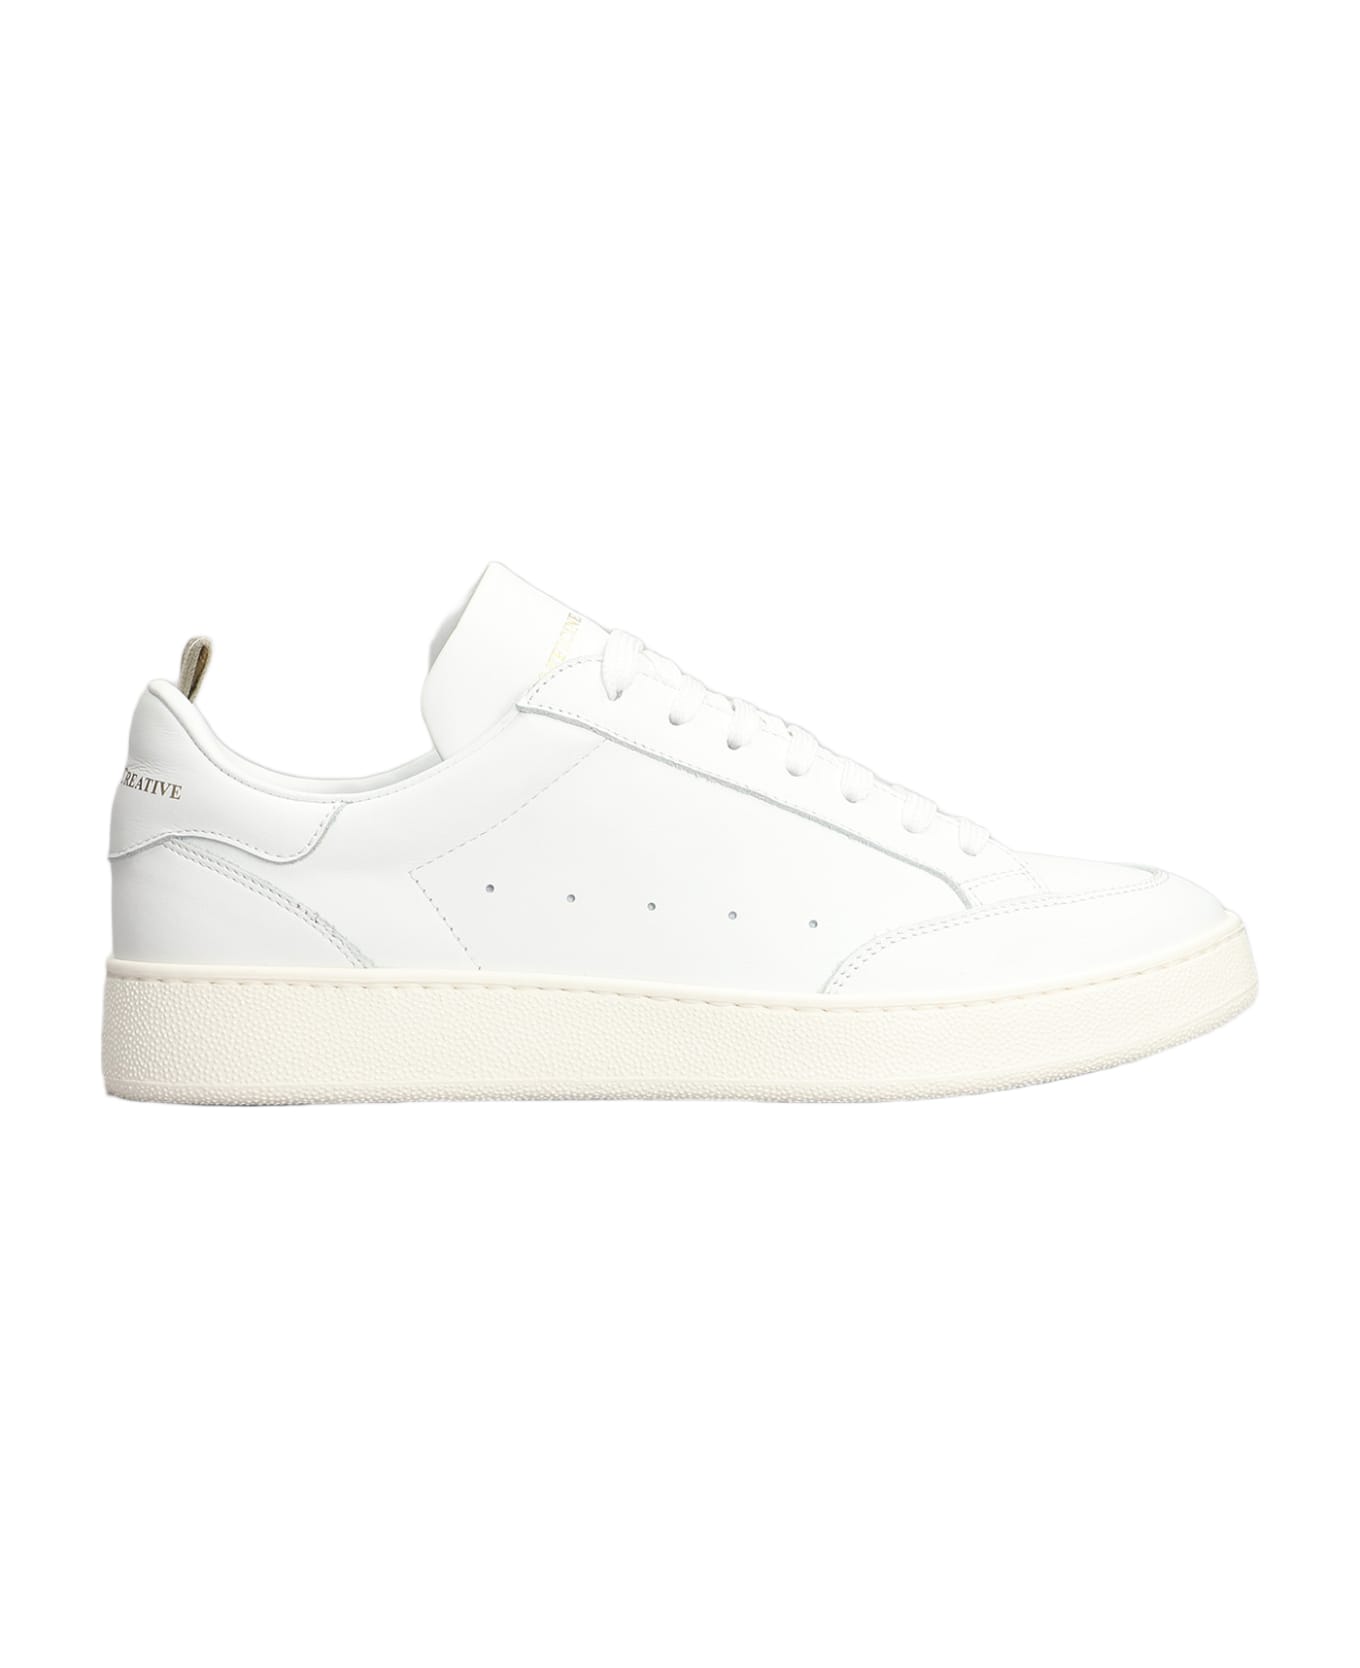 Officine Creative Mower Sneakers In White Leather - white スニーカー